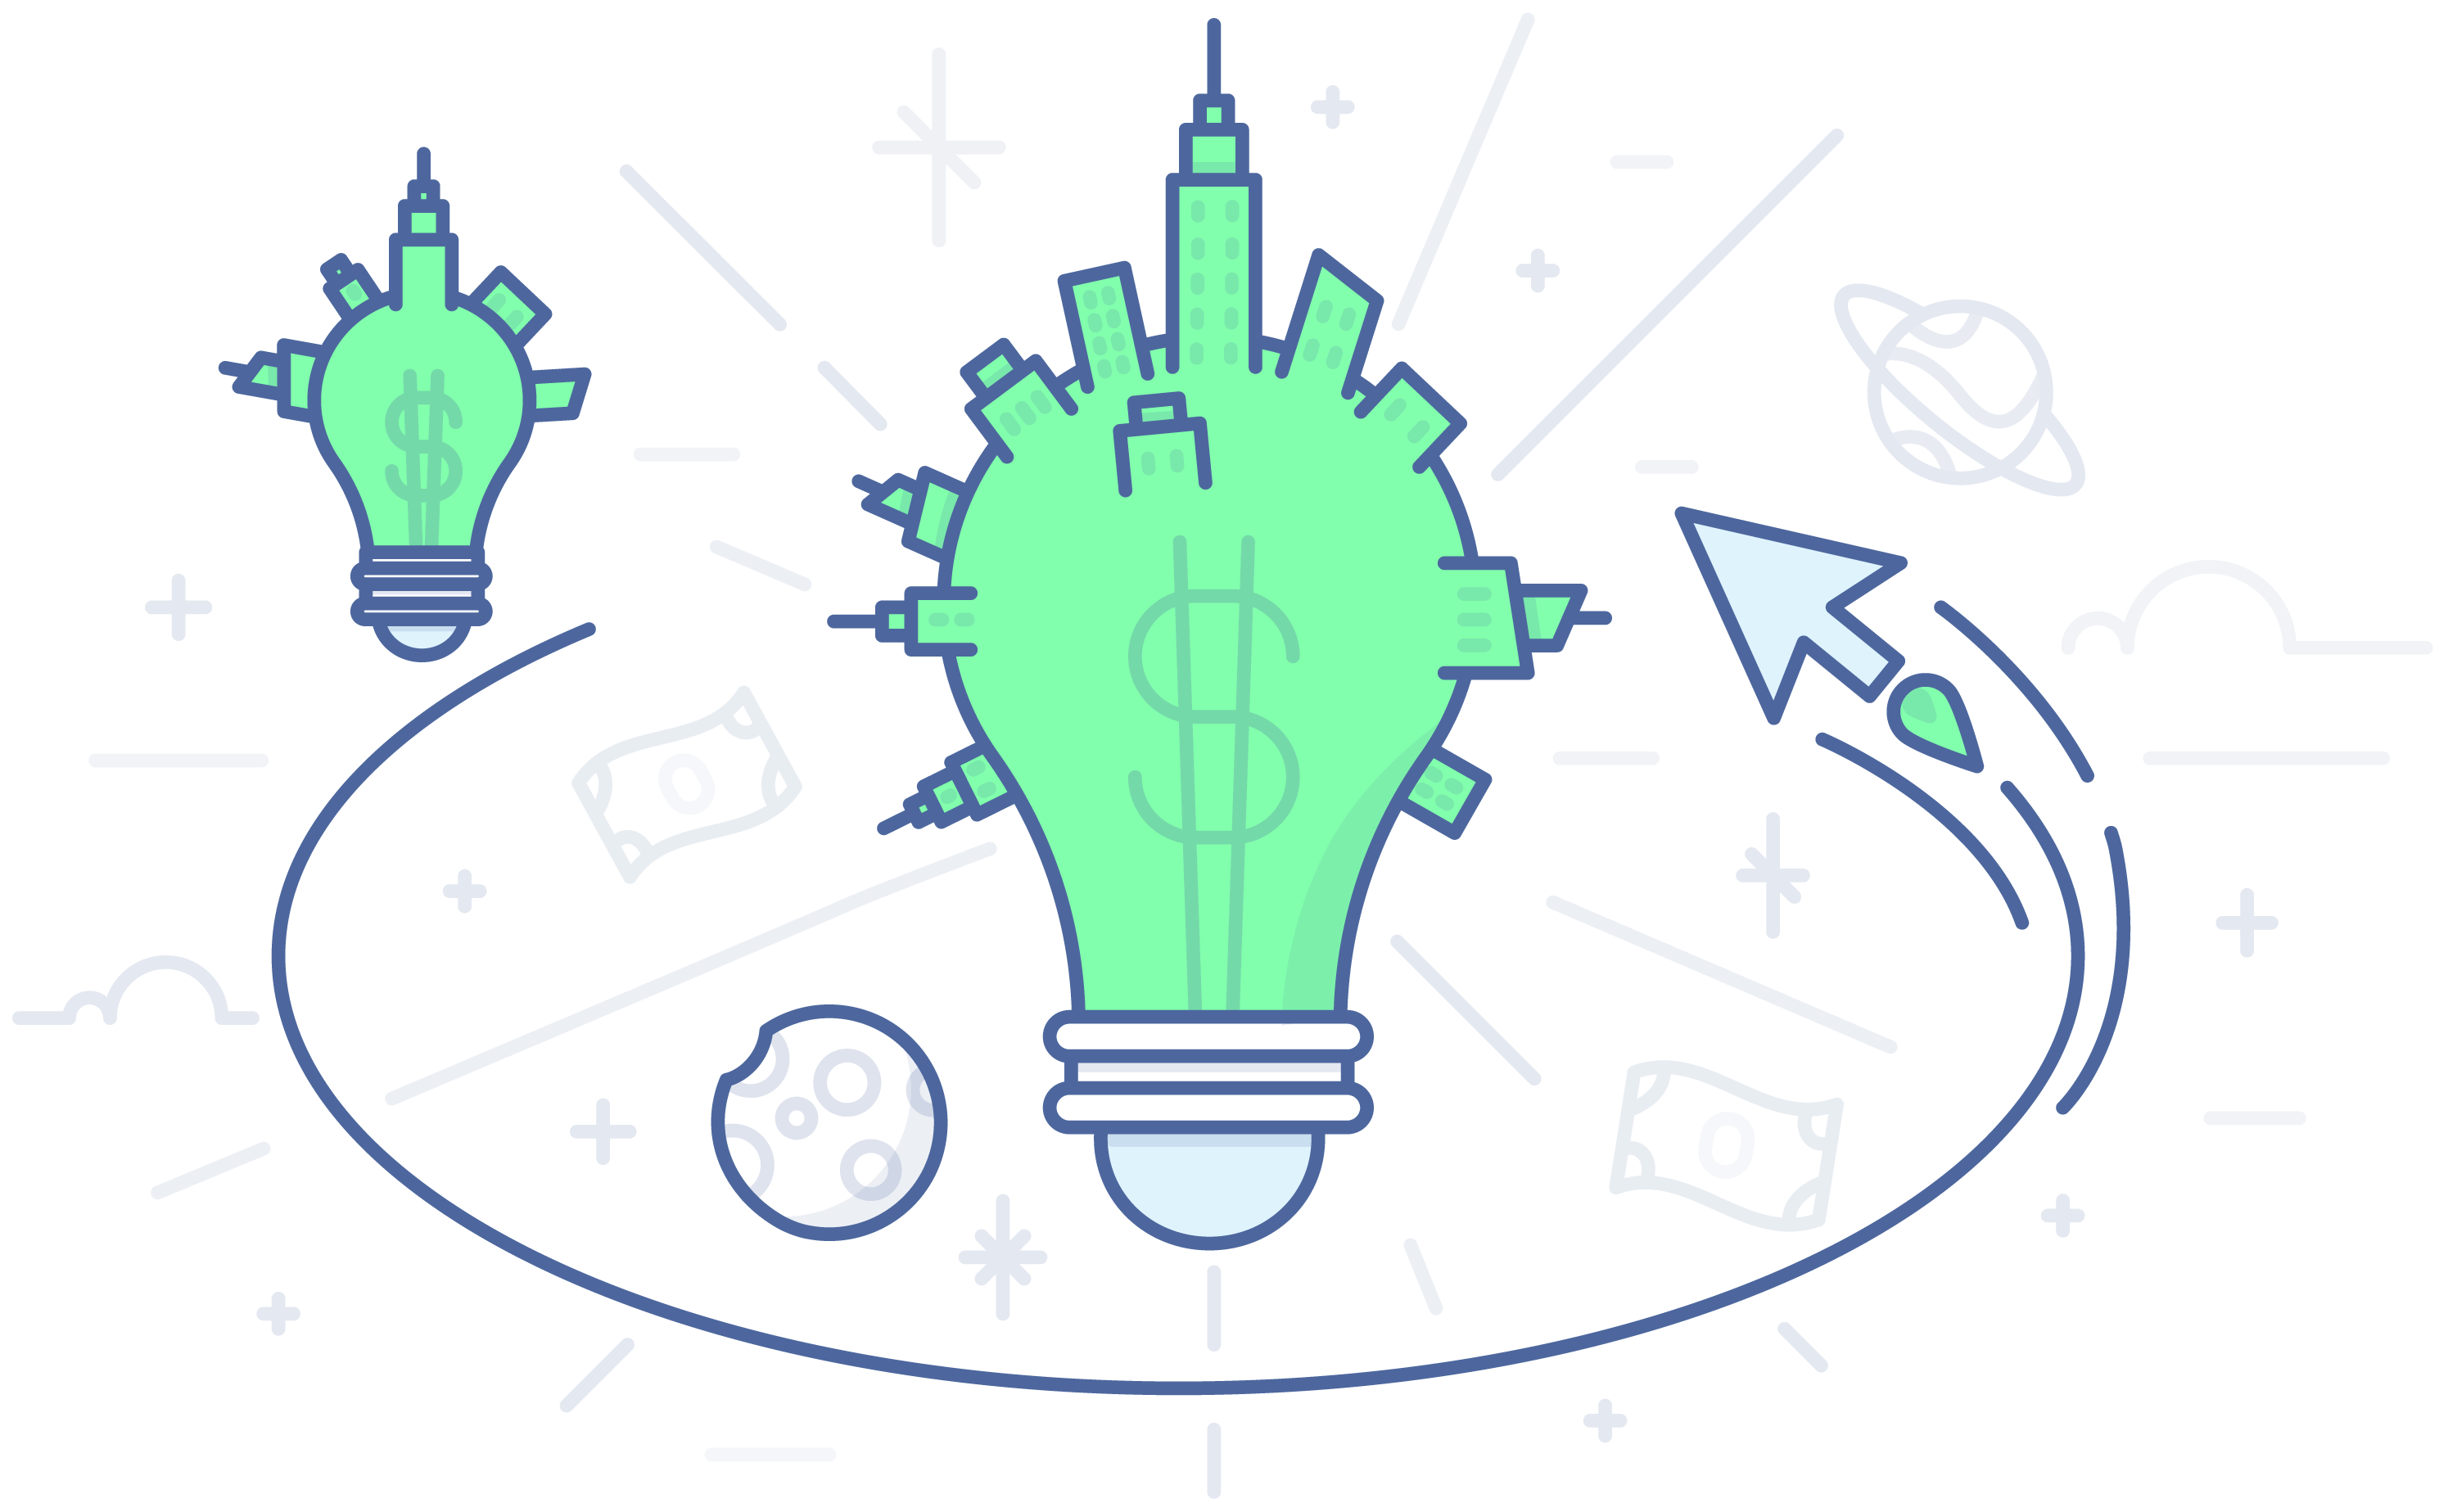 Part 5: Take Your Business Idea From Concept to Profit Fast